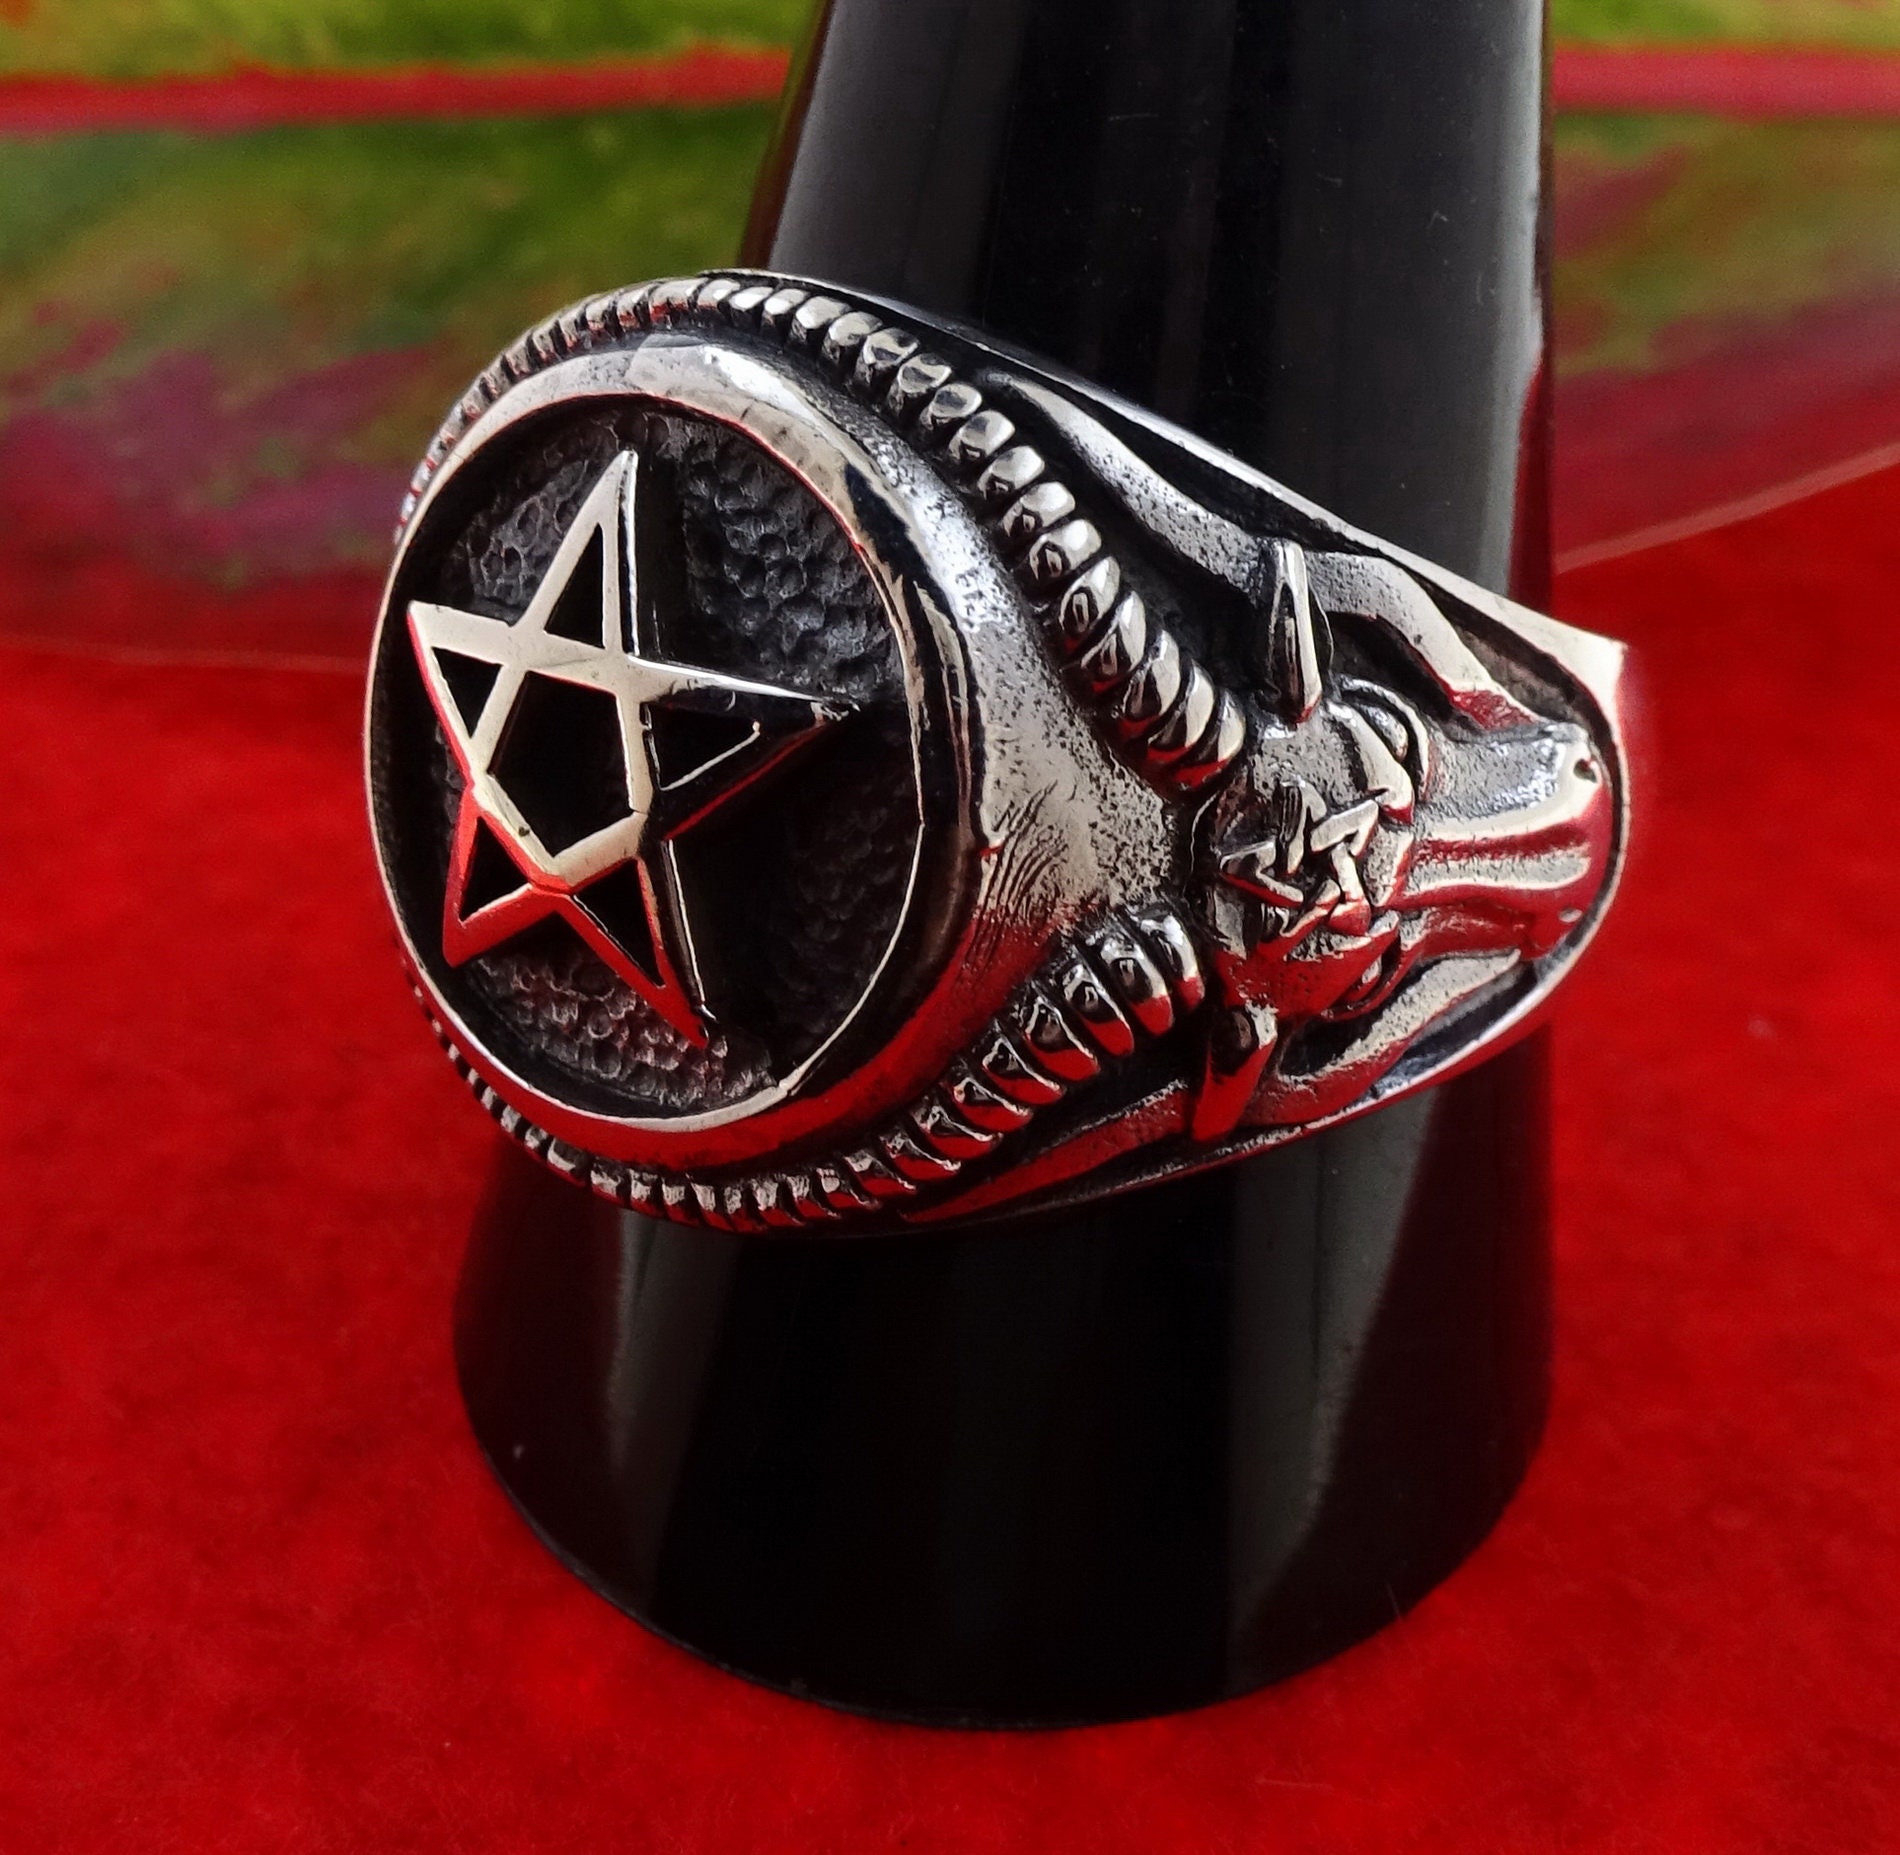 Inverted Pentagram Ram's Head Ring Satan Wicca Pagan Occult 925 Silver